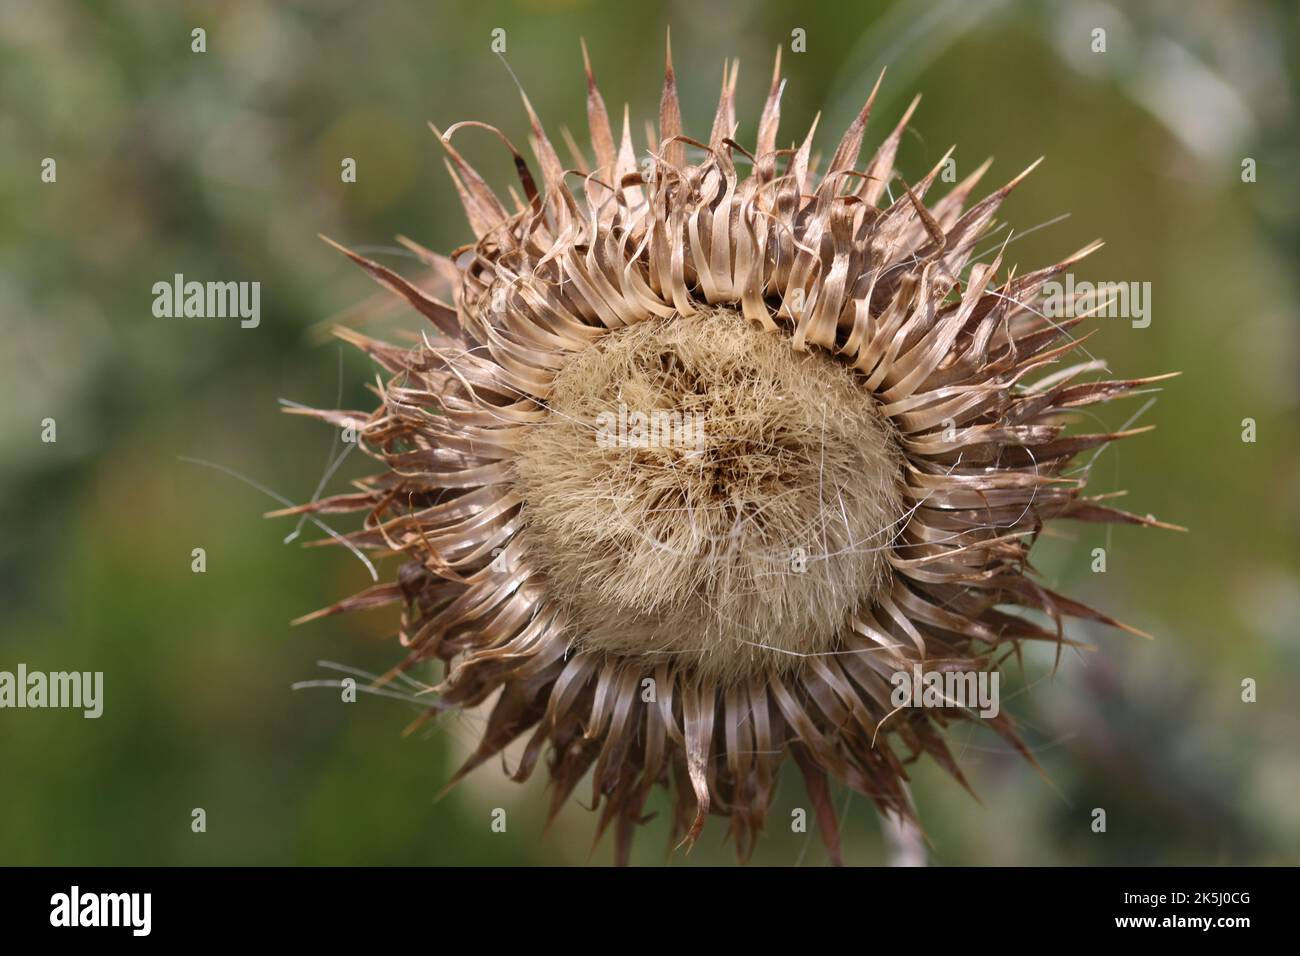 Musk thistle, Carduus nutans, seed head in close up with a blurred background of leaves. Stock Photo